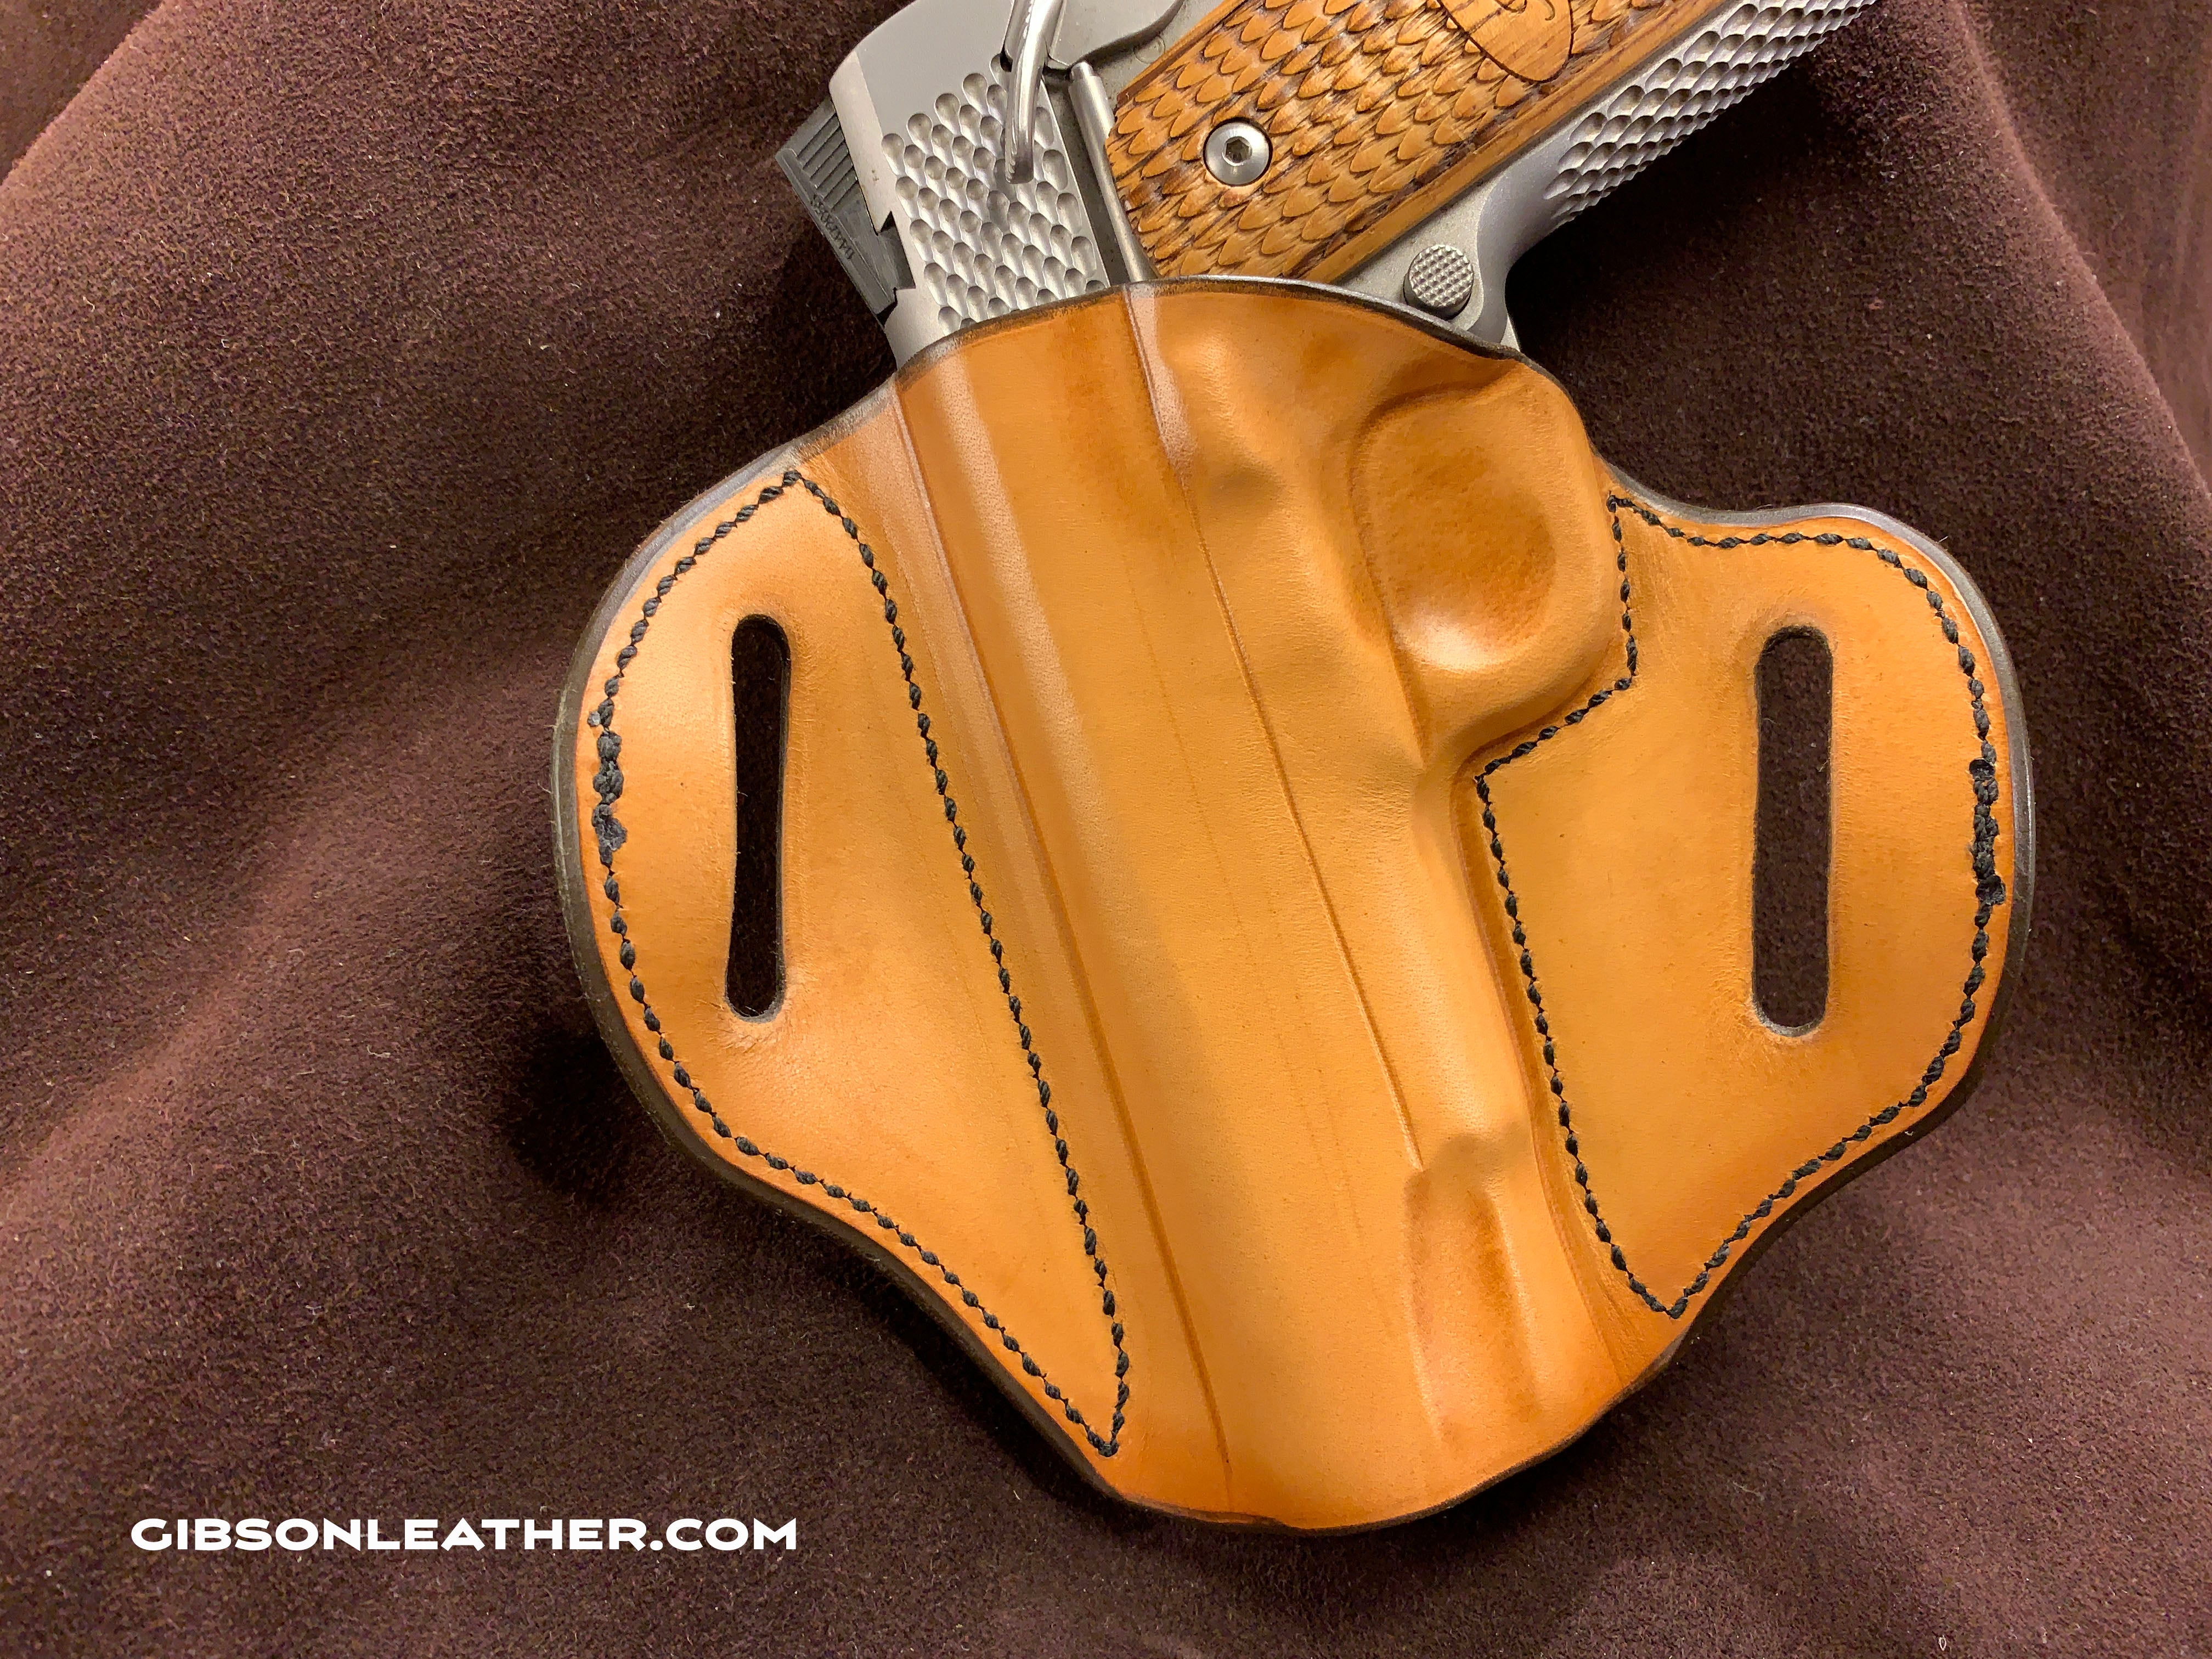 GIBSON 1911 4"-4.25" LEATHER HOLSTER CROSSCUT SALTILLO RH OWB IN STOCK